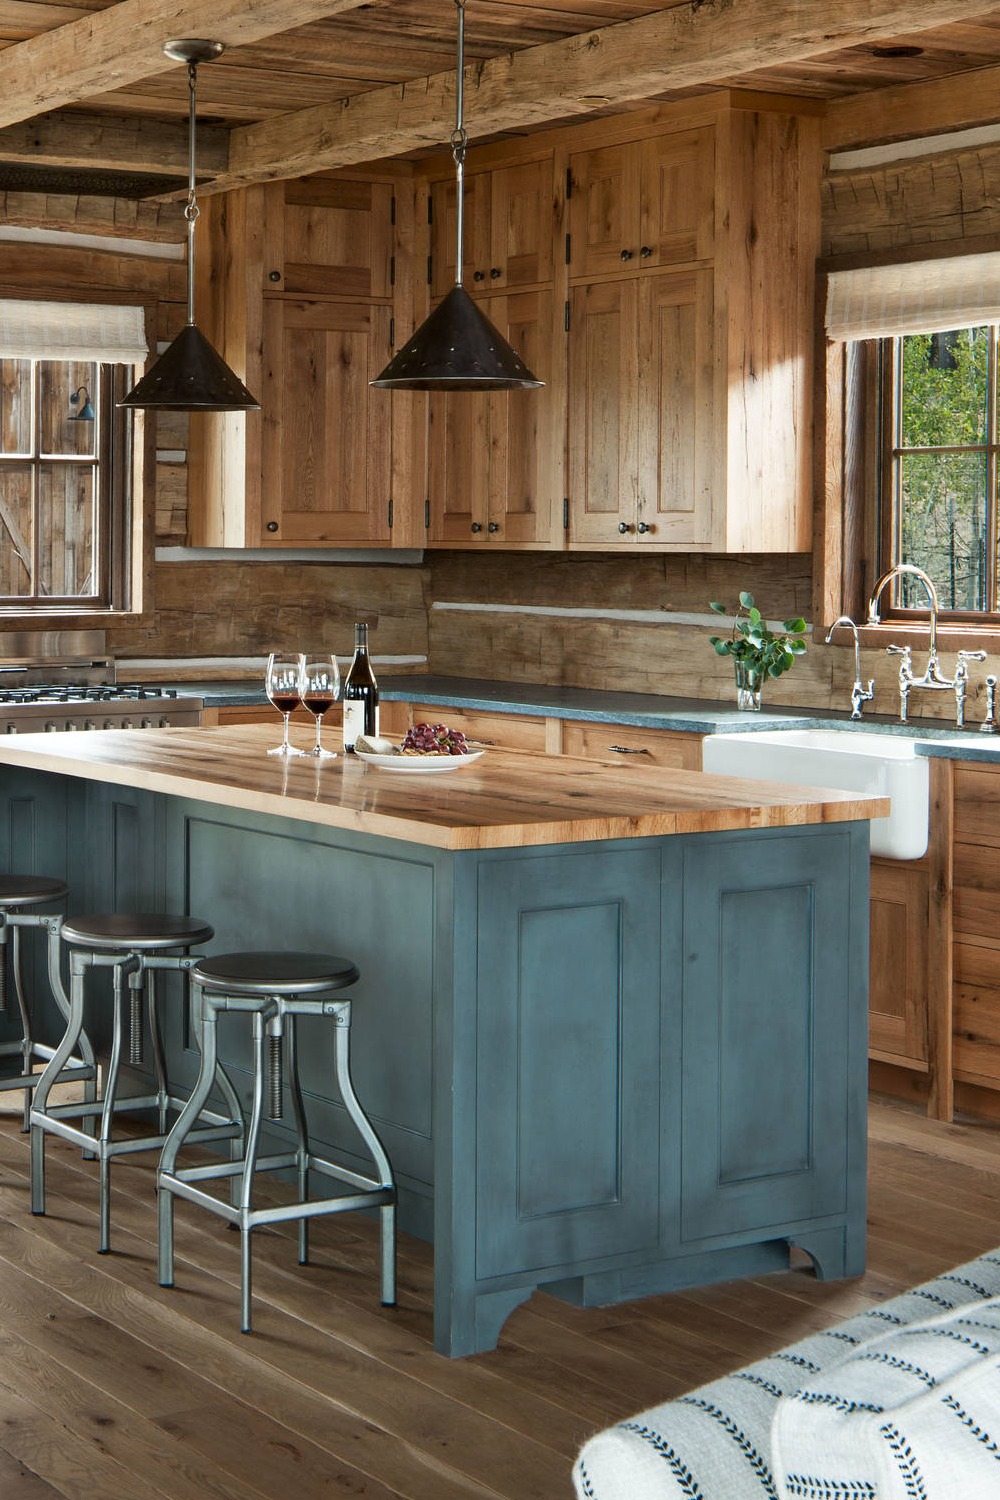 Rustic Appeal Wooden Cabinets Stone Walls Design Ideas Exposed Beams Natural Materials